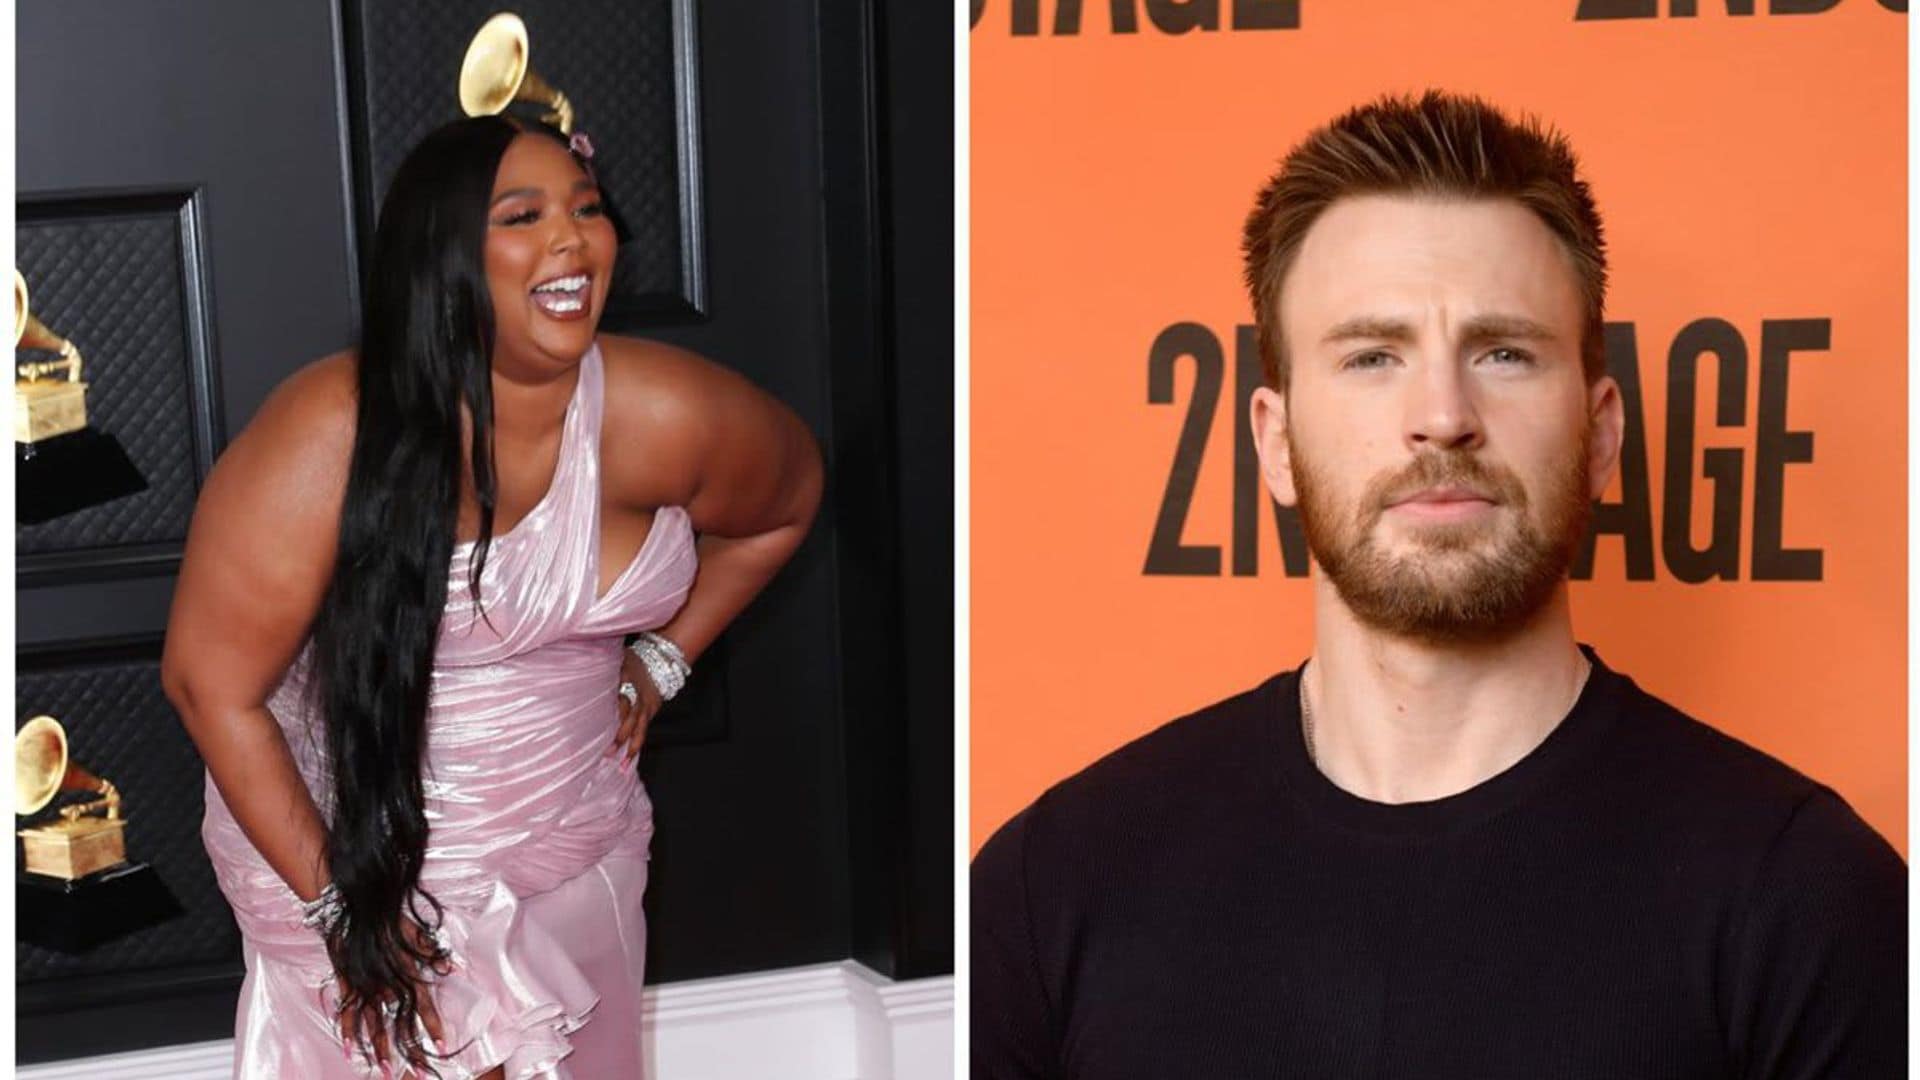 Lizzo started a rumor that she is pregnant with Chris Evans’ baby and he is excited about it